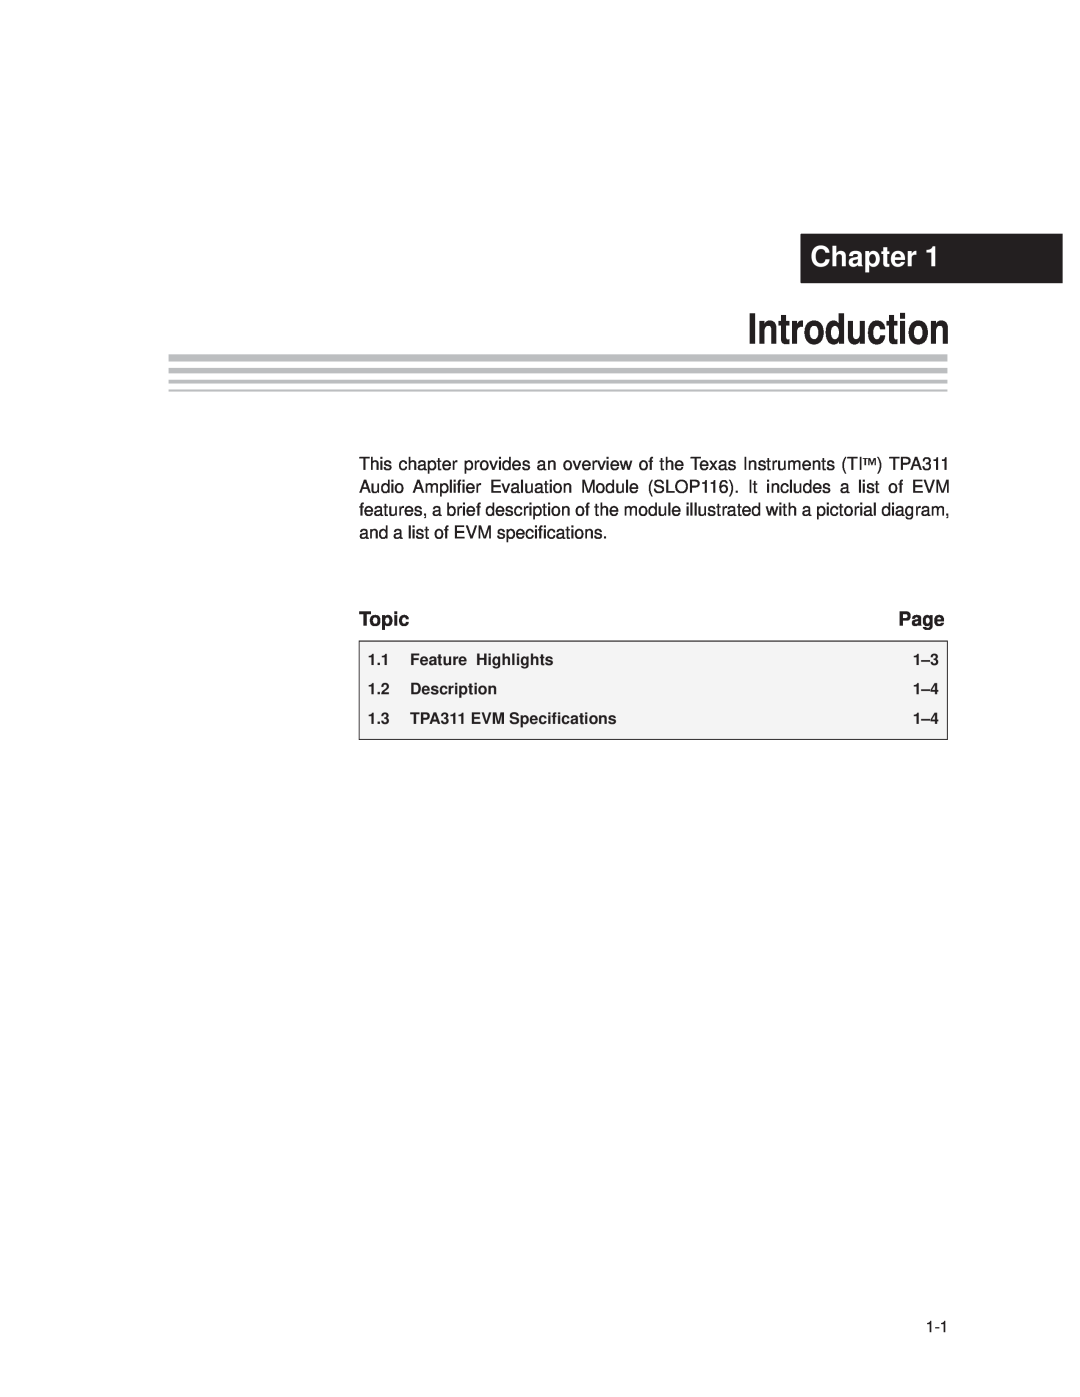 Texas Instruments TPA 311 manual Introduction, Chapter, Page, Topic 